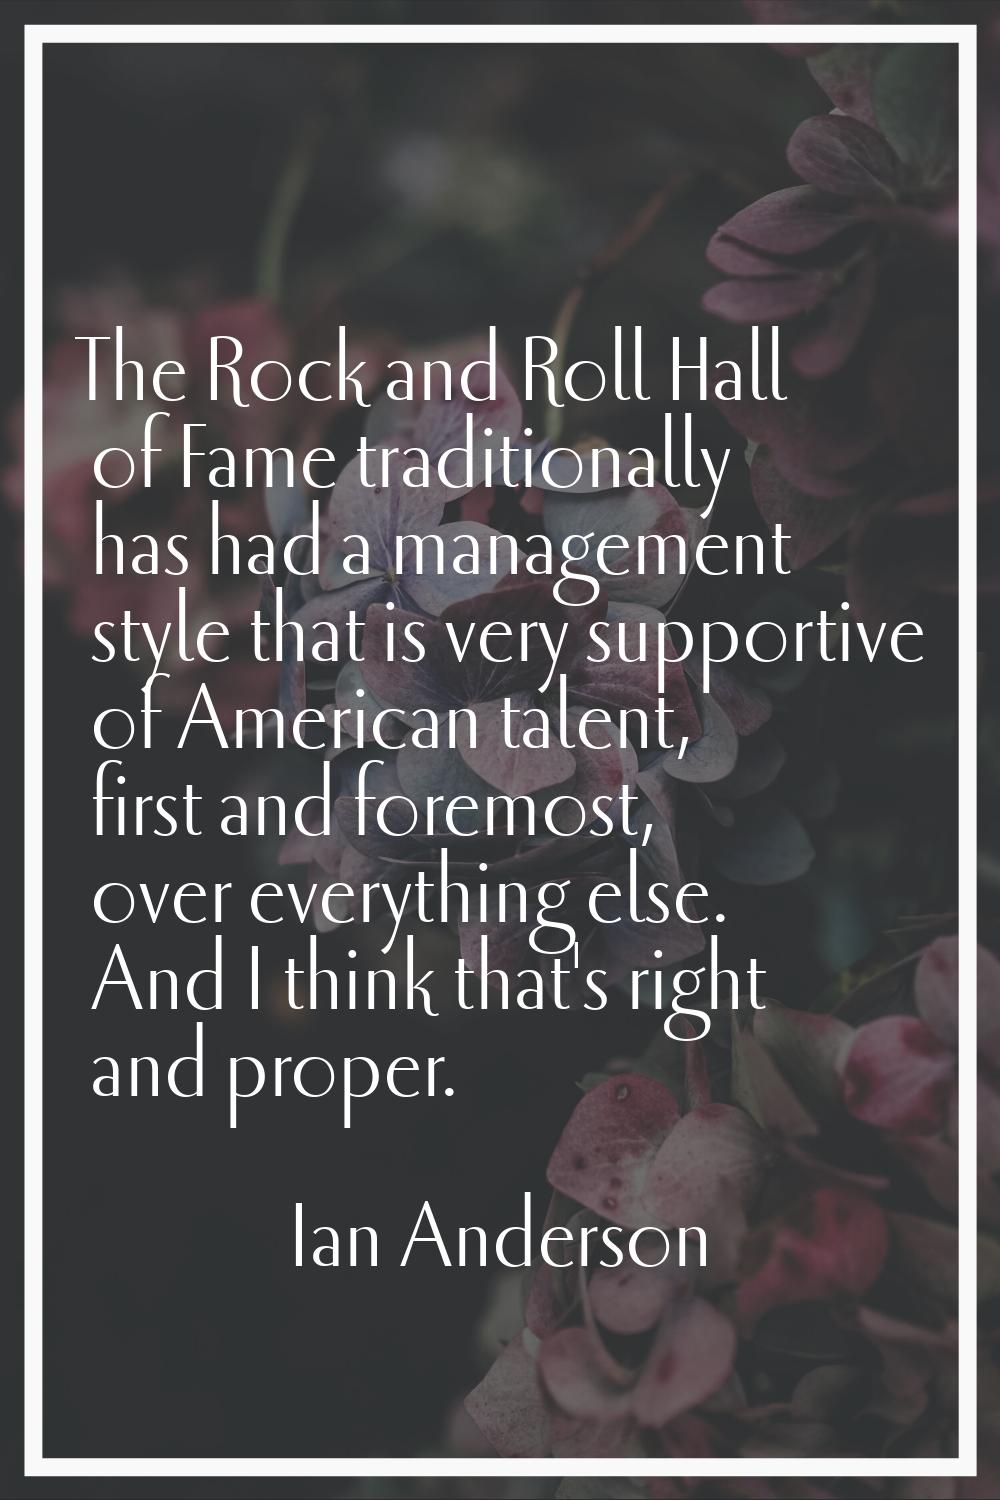 The Rock and Roll Hall of Fame traditionally has had a management style that is very supportive of 